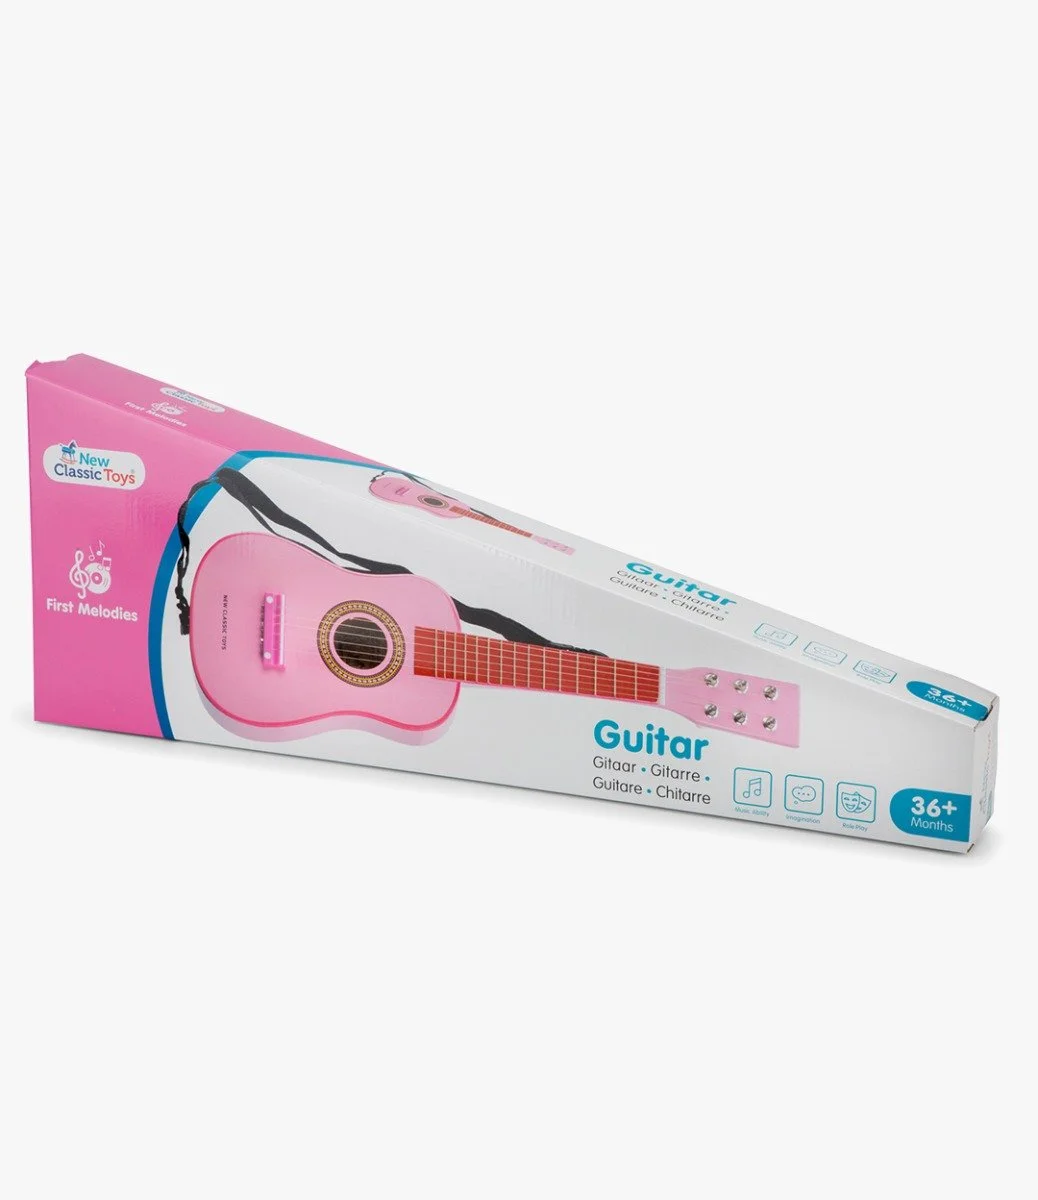 Guitar - Pink by New Classic Toys